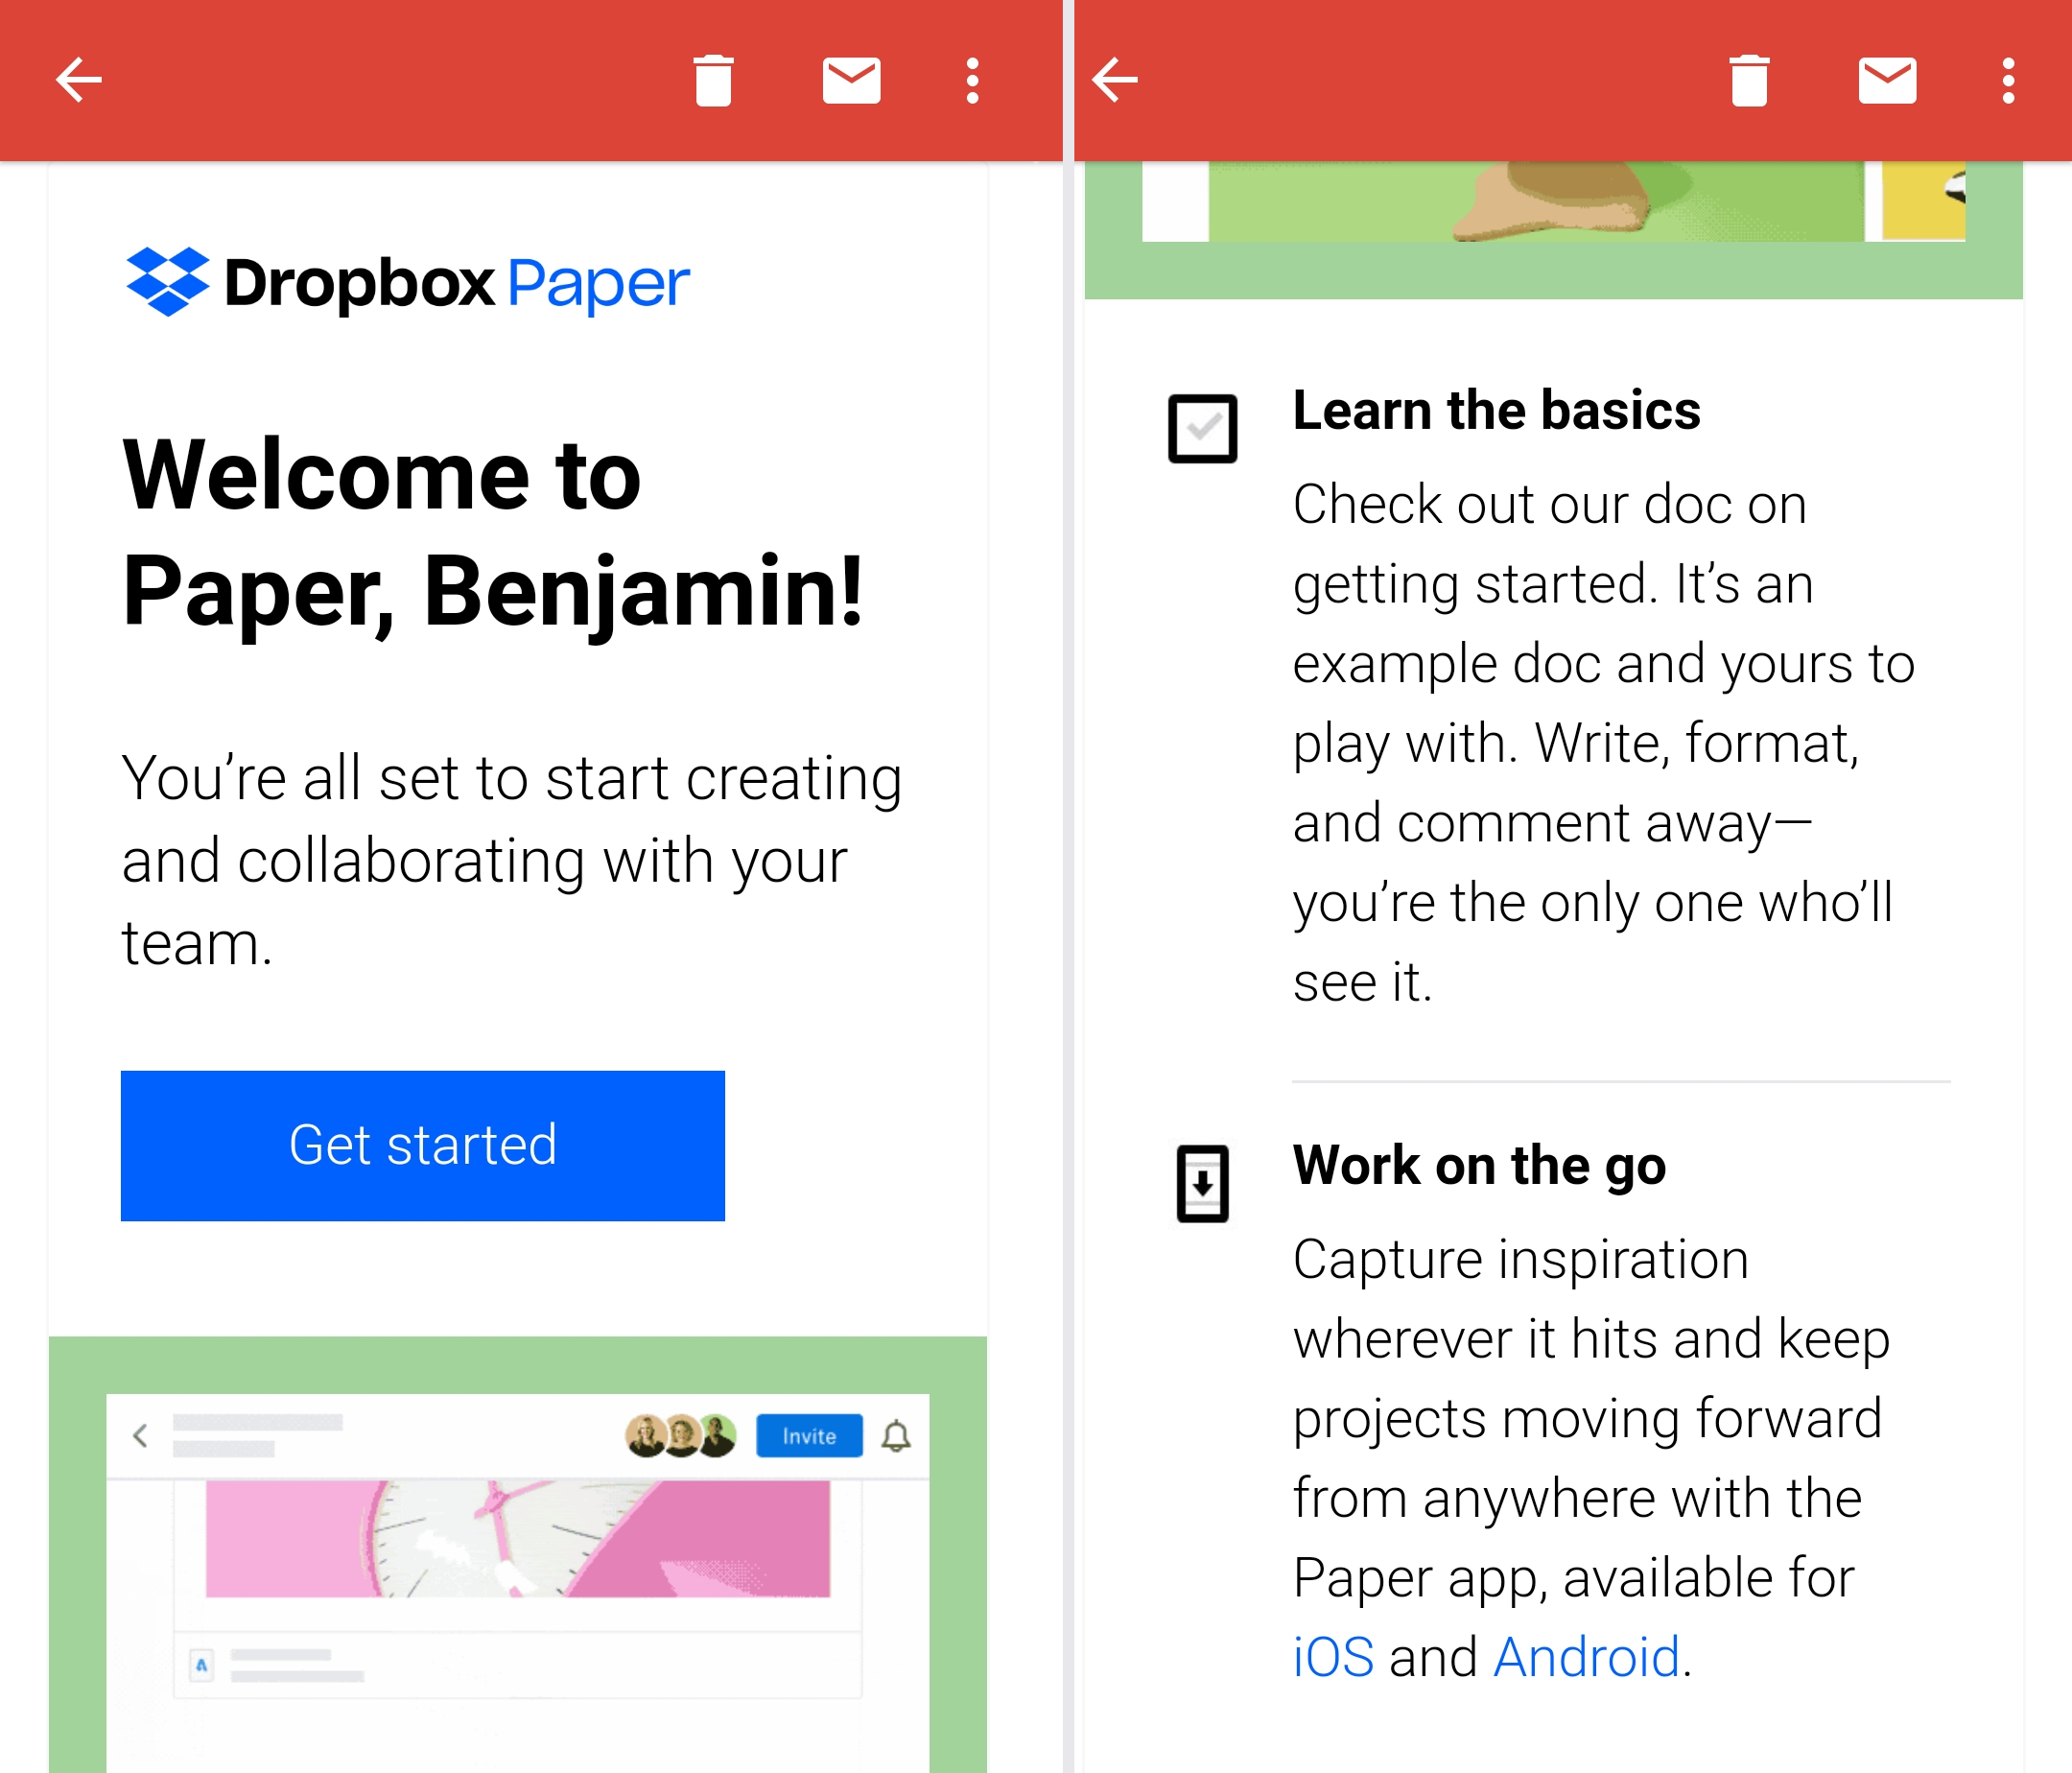 dropbox paper welcome email mobile